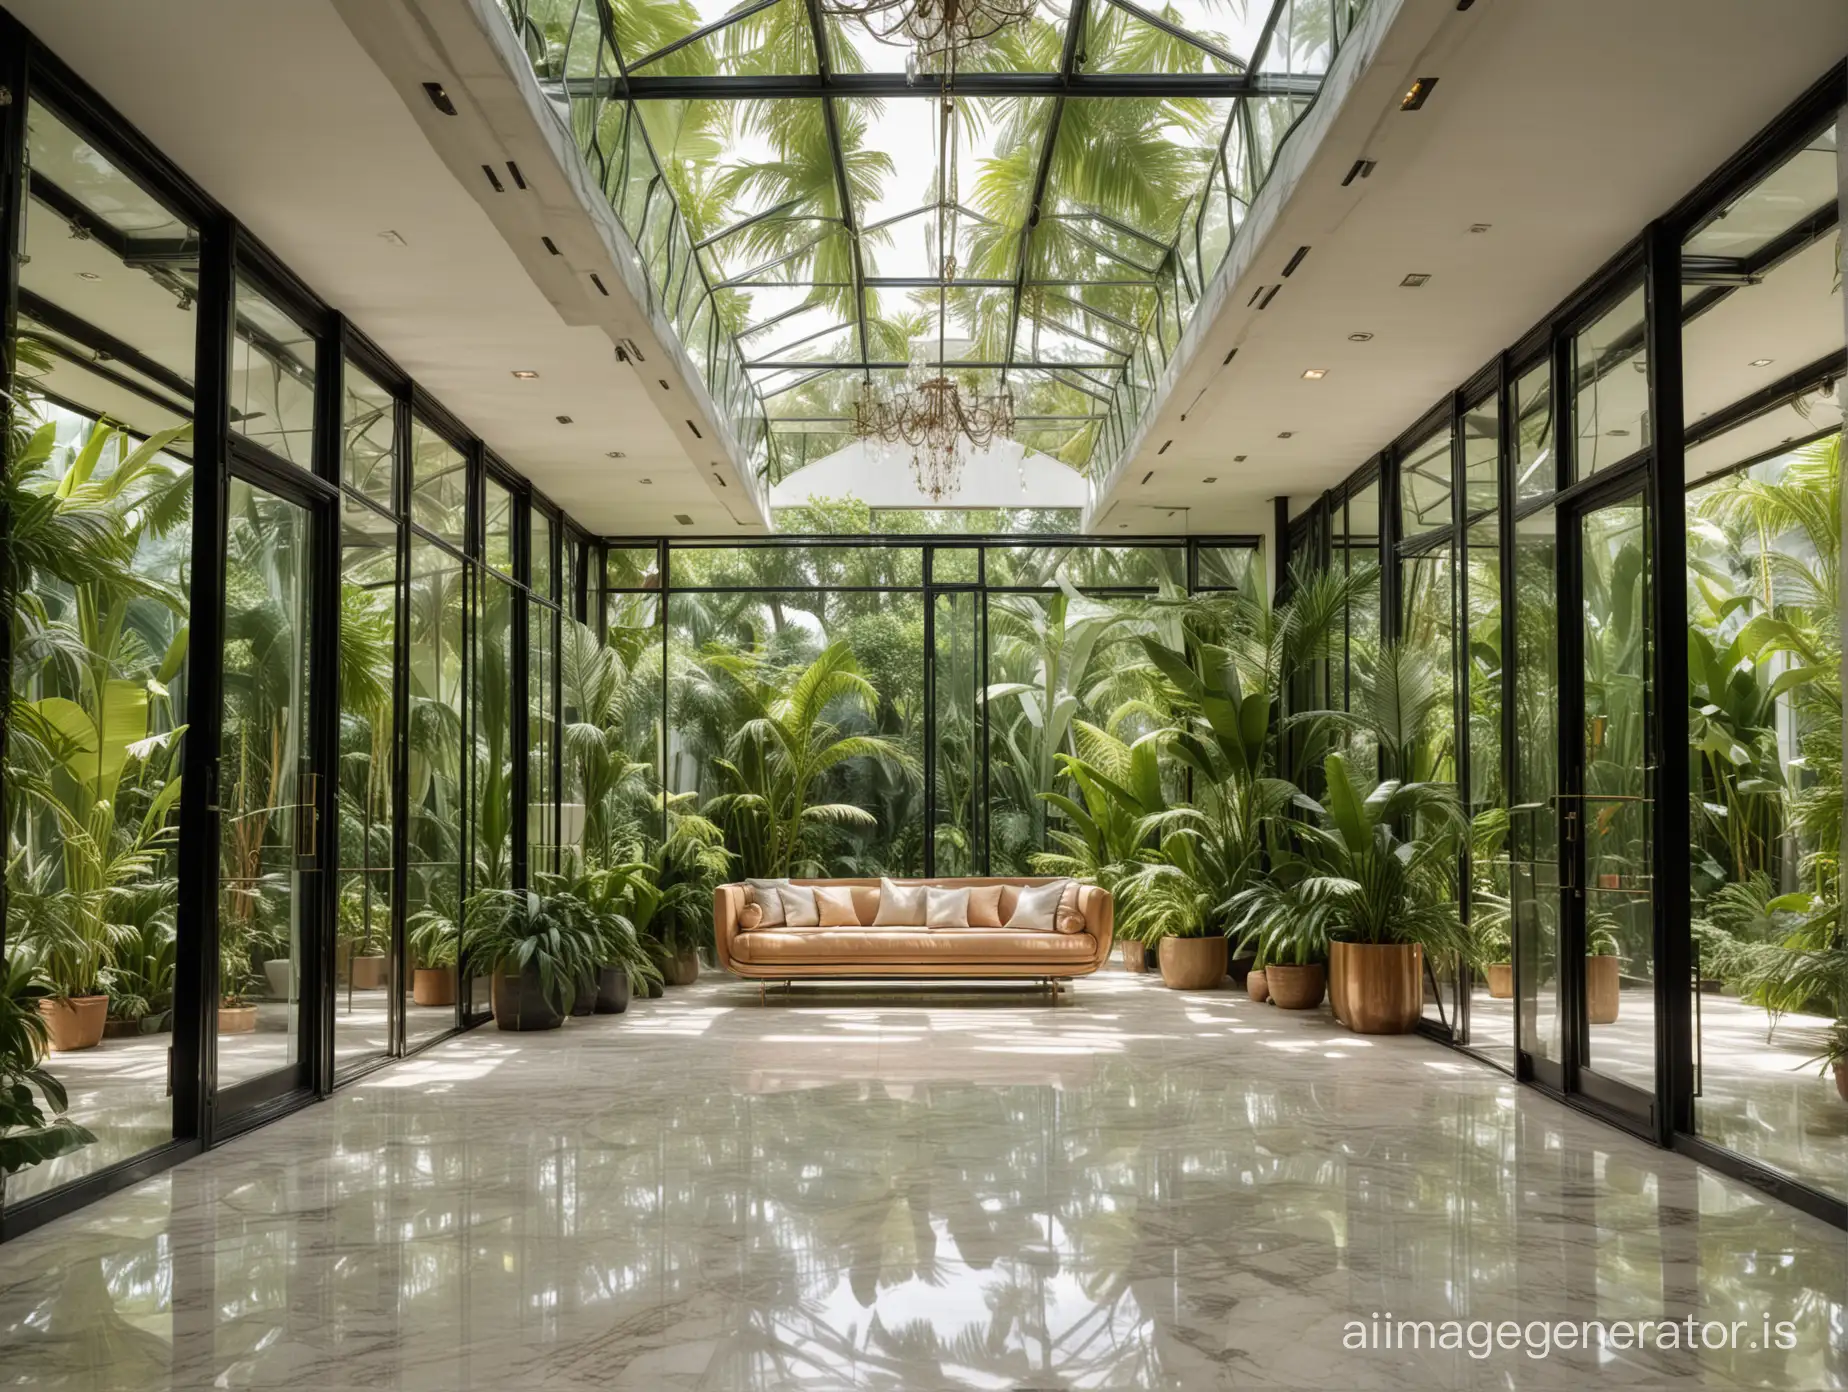 Luxurious-Art-Deco-Glass-House-Interior-with-Sustainable-EcoFriendly-Design